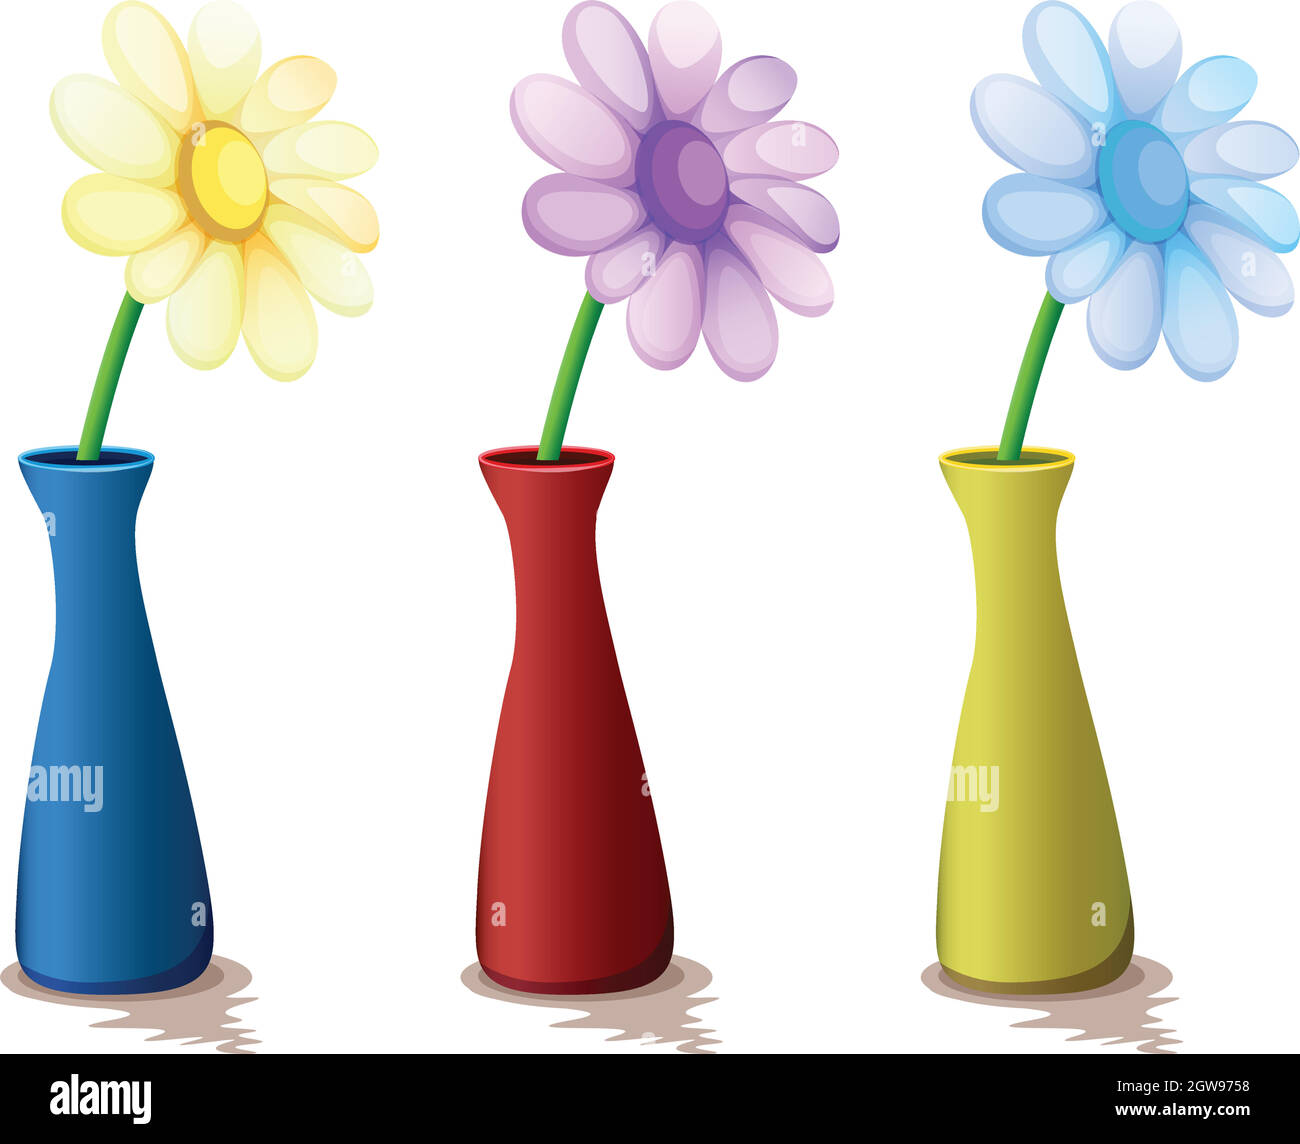 Colorful vases with flowers Stock Vector